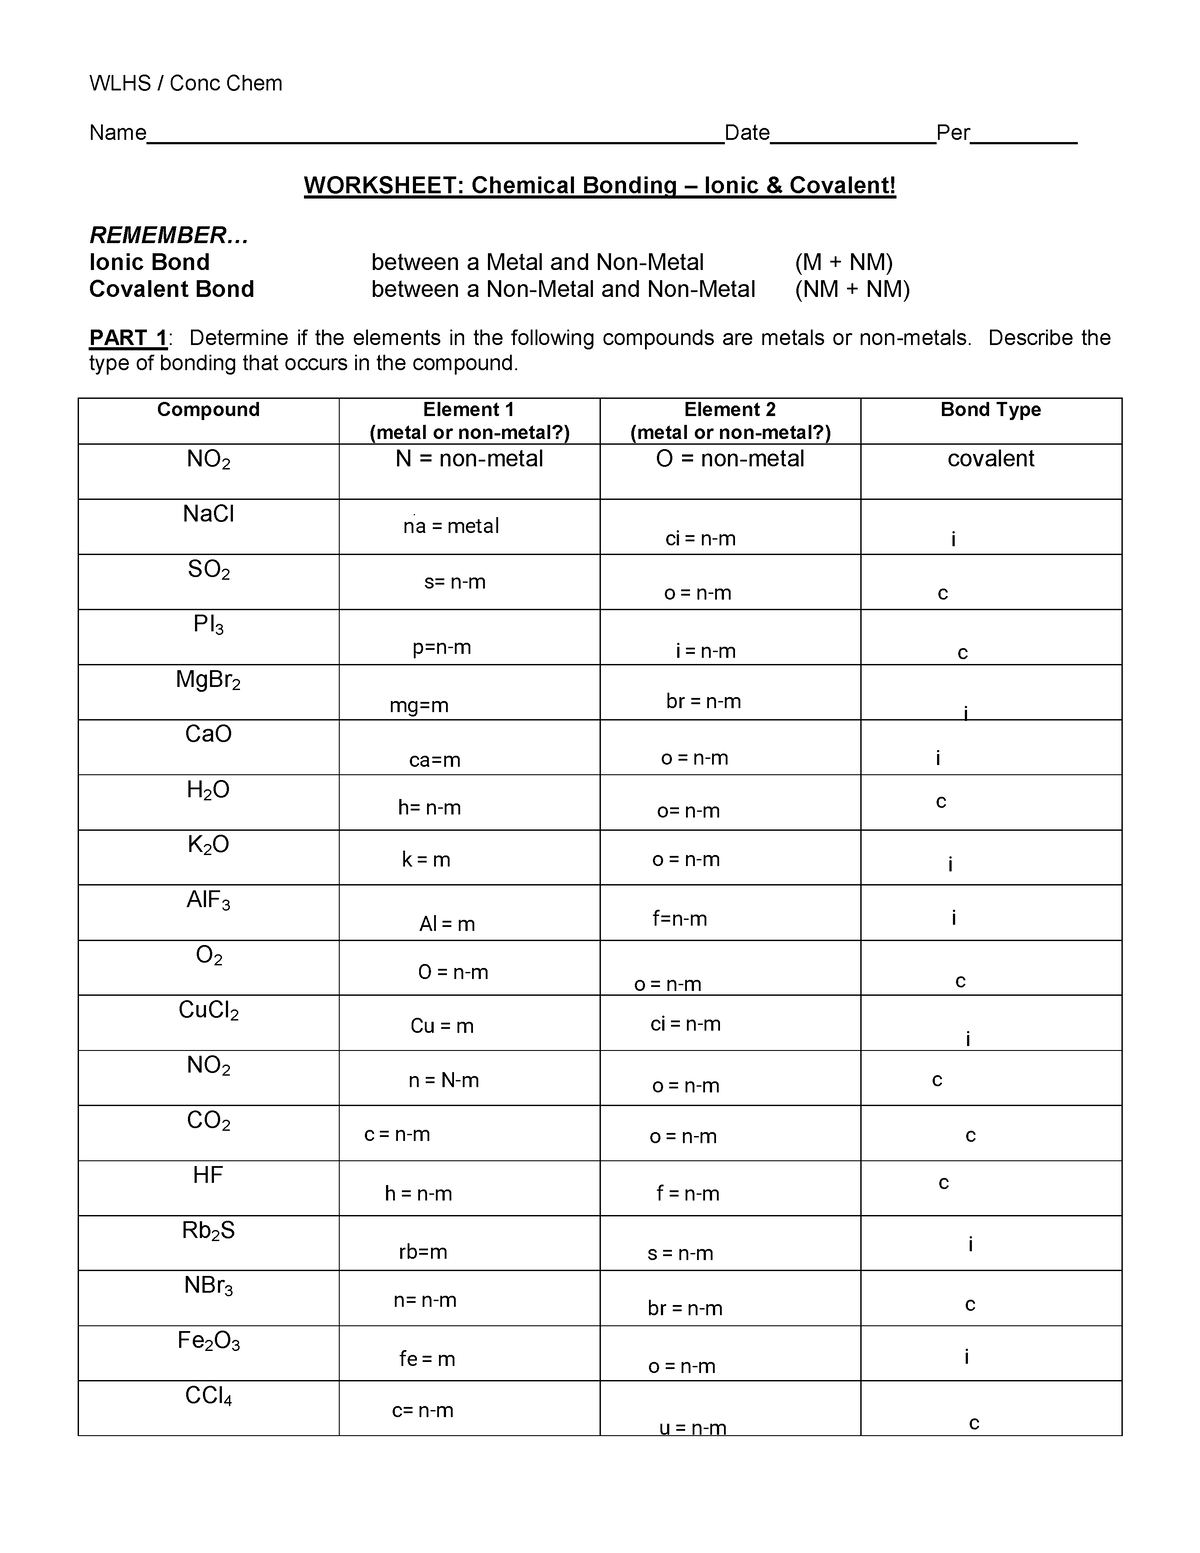 Kami Export Ionic And Covalent Bonding Practice 1 WLHS Conc Chem Name Date Per WORKSHEET 